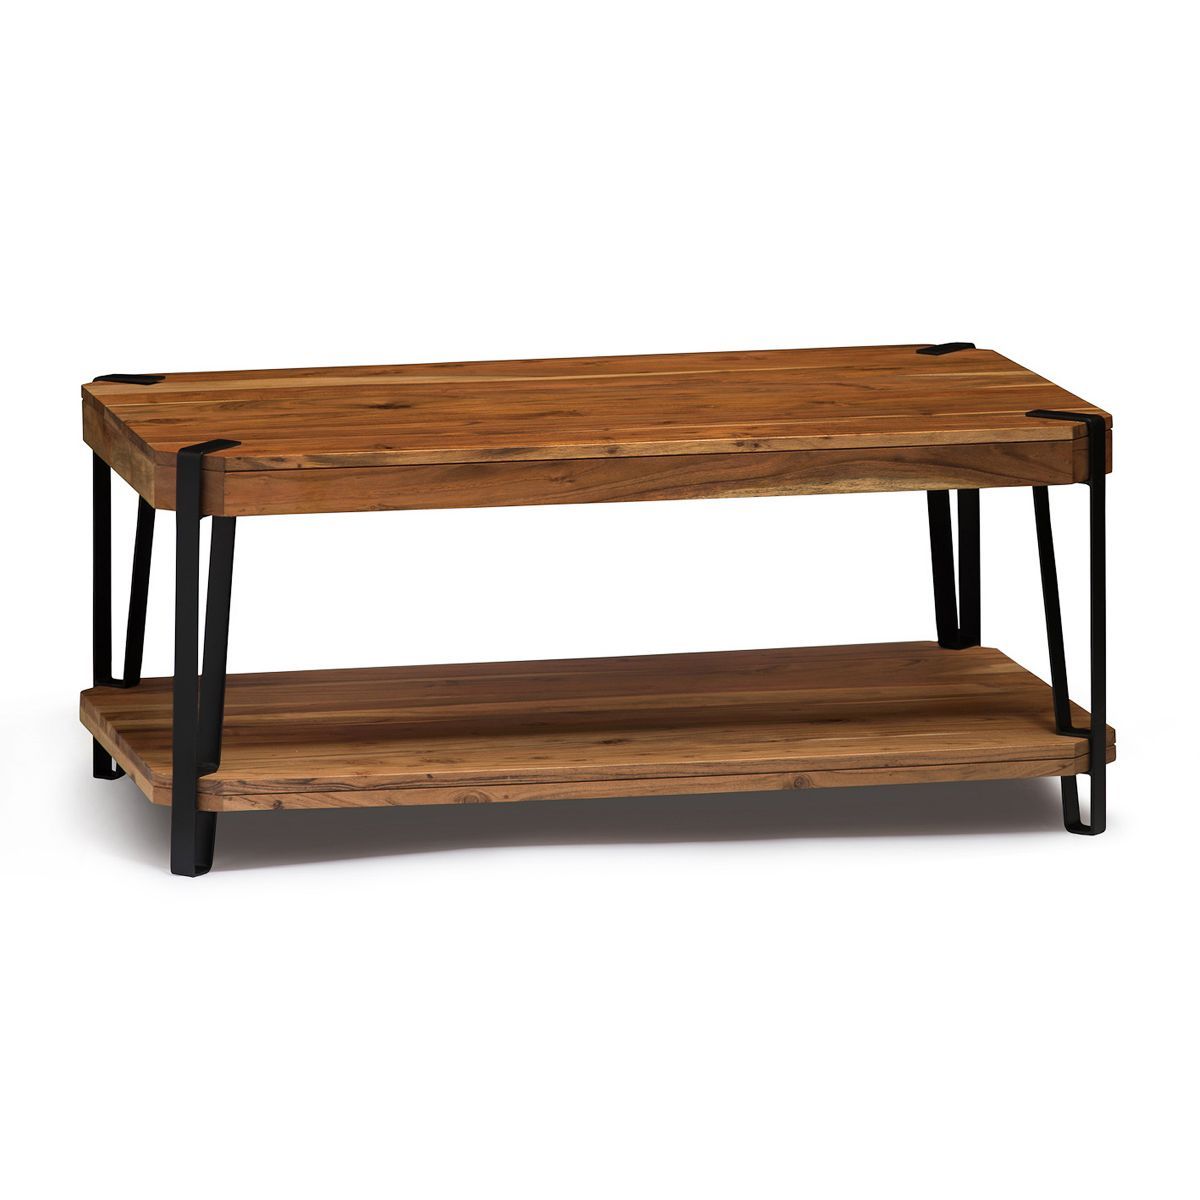 Alaterre Furniture Ryegate Live Edge Solid Wood Coffee Table Metal and Wood | Target